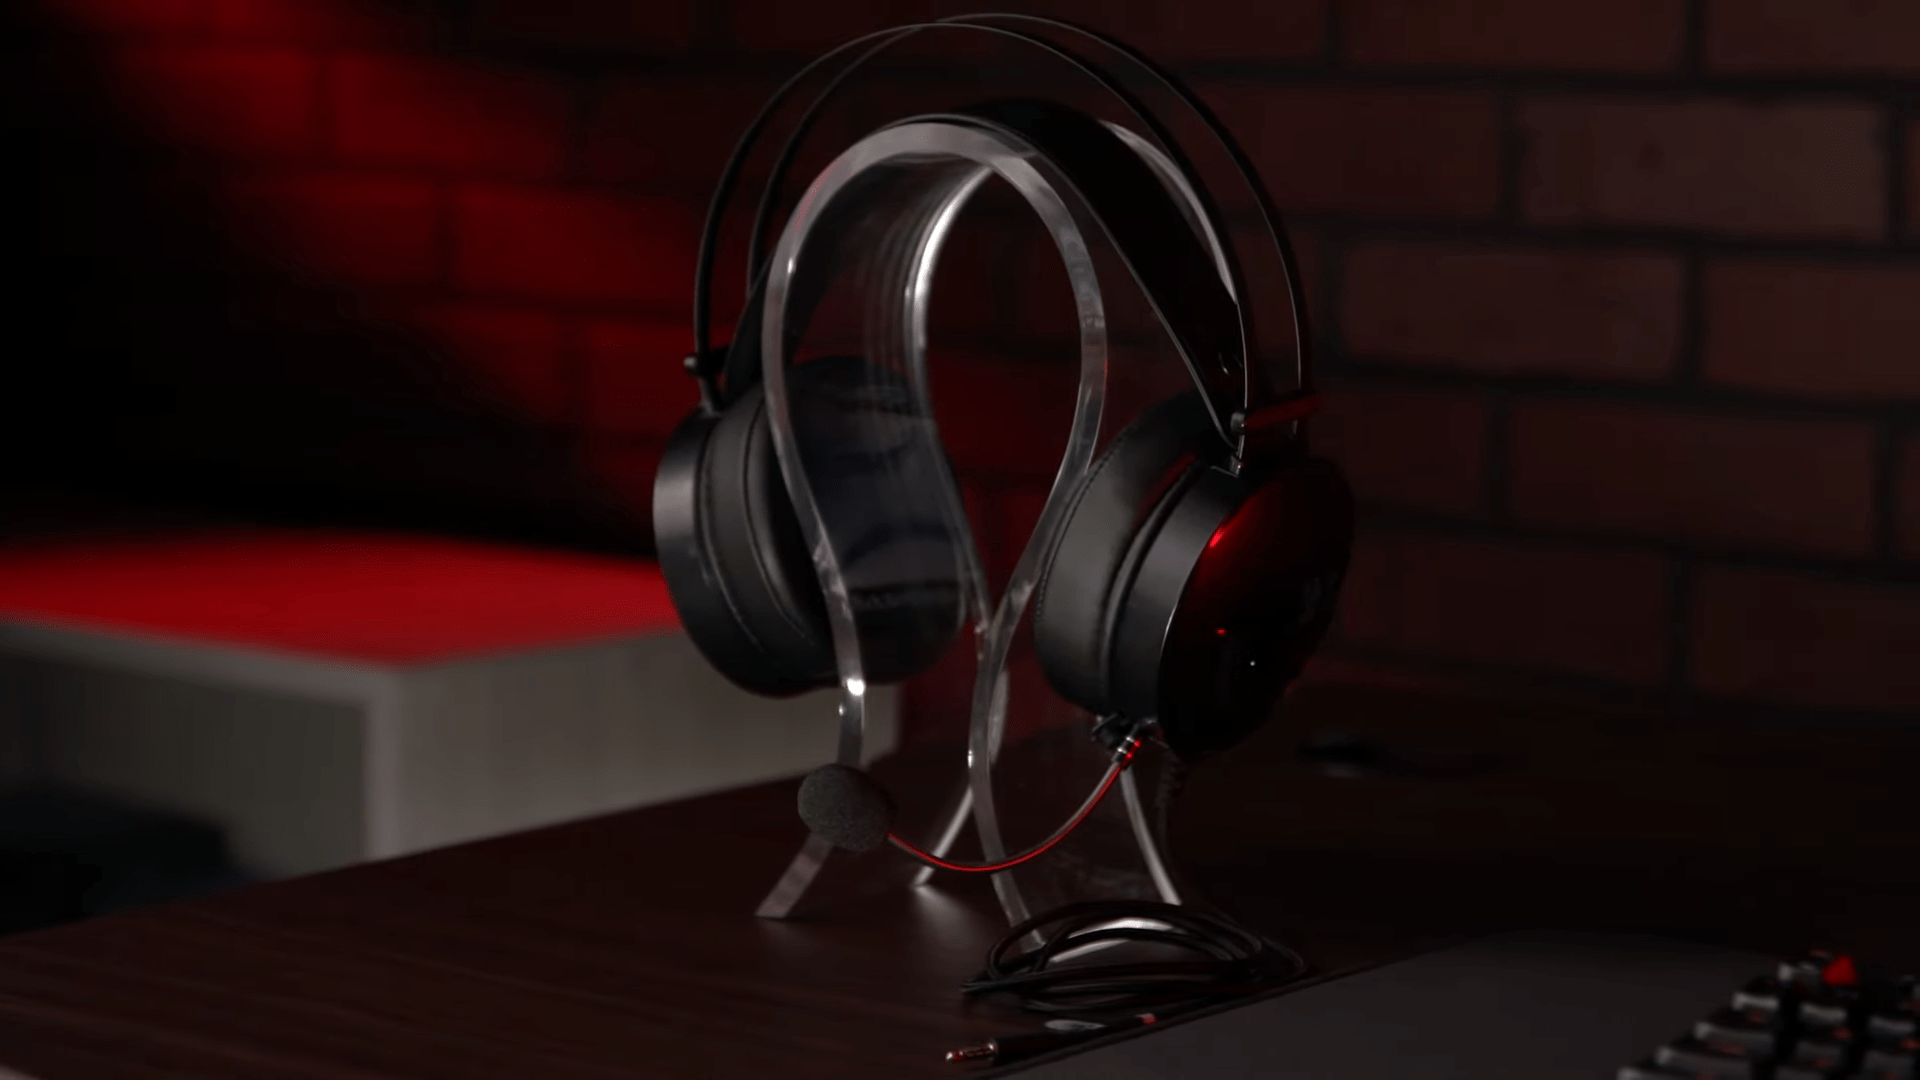 Rosewill Is Back With The Affordable Nebula GX51 Gaming Headphones Offering 7.1 Surround Sound For Just $60